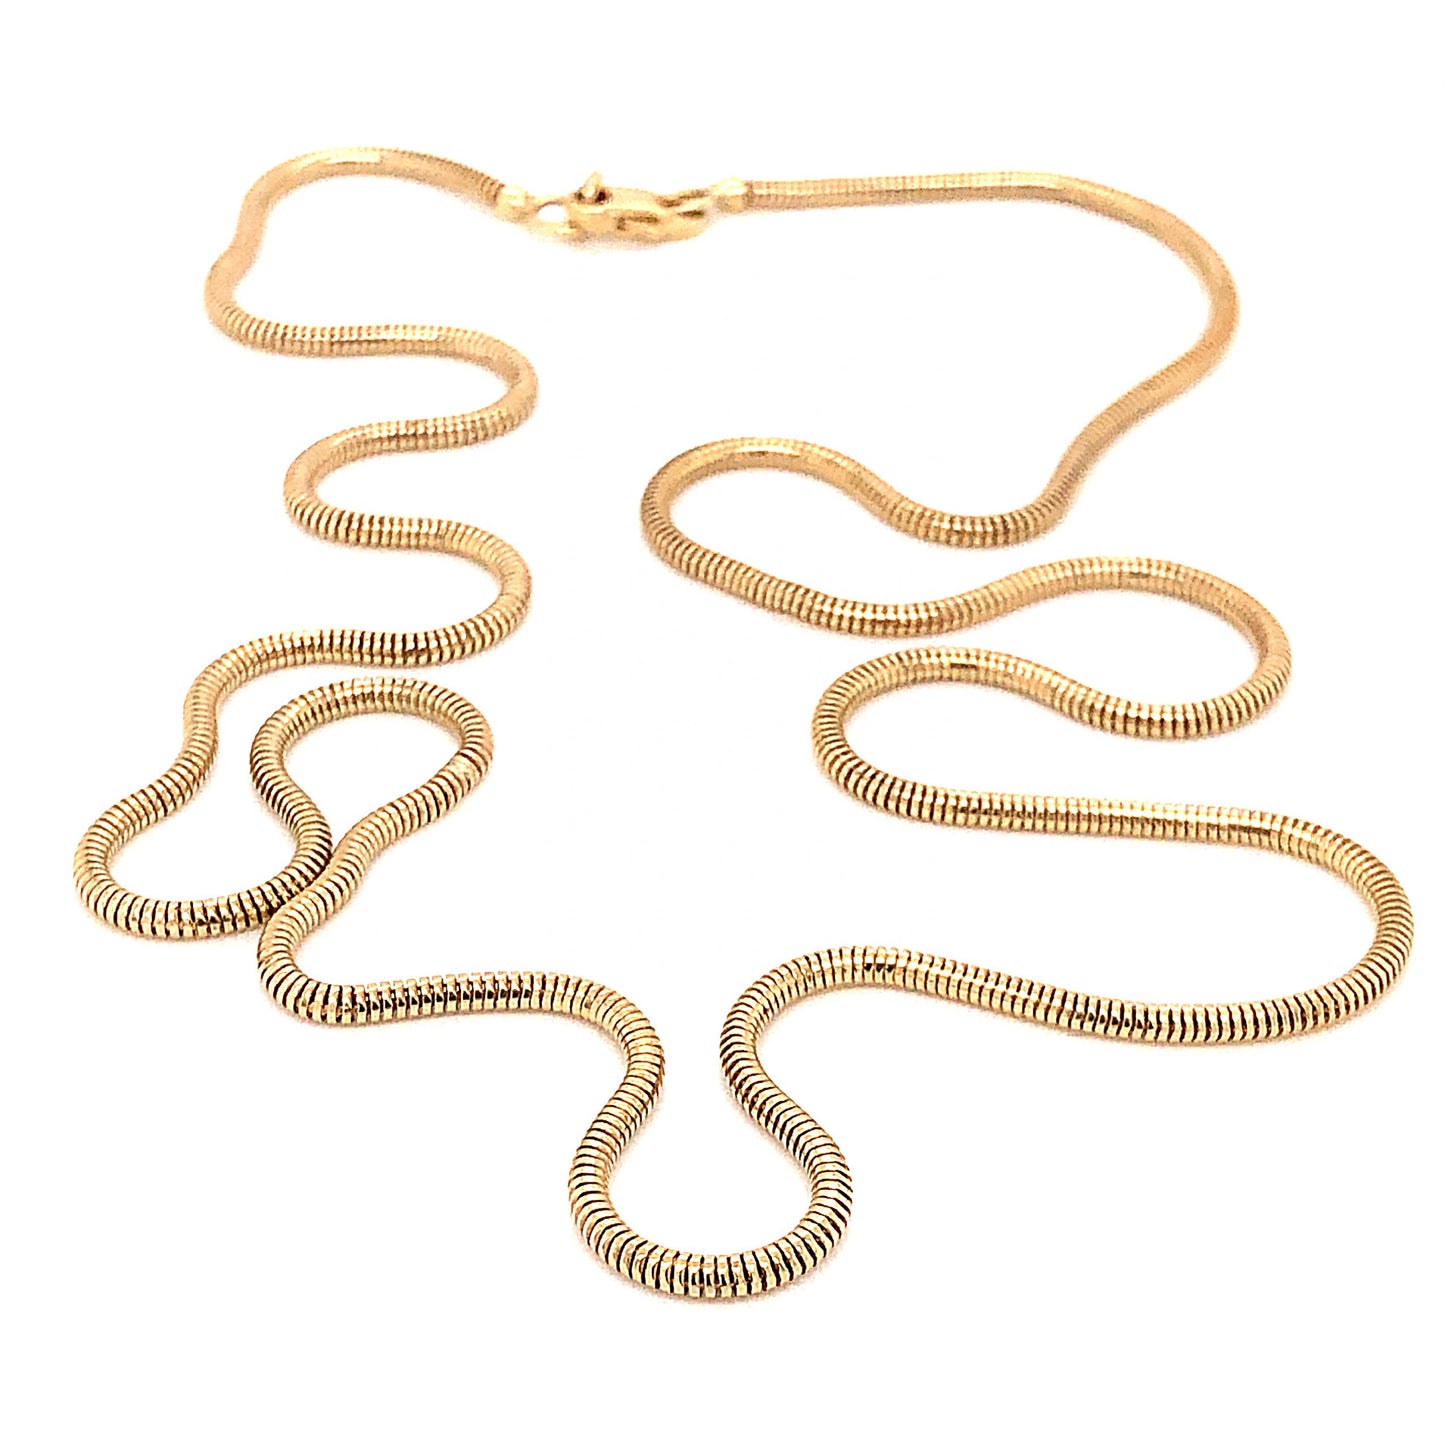 20 Inch Chain Necklace in 14k Yellow Gold